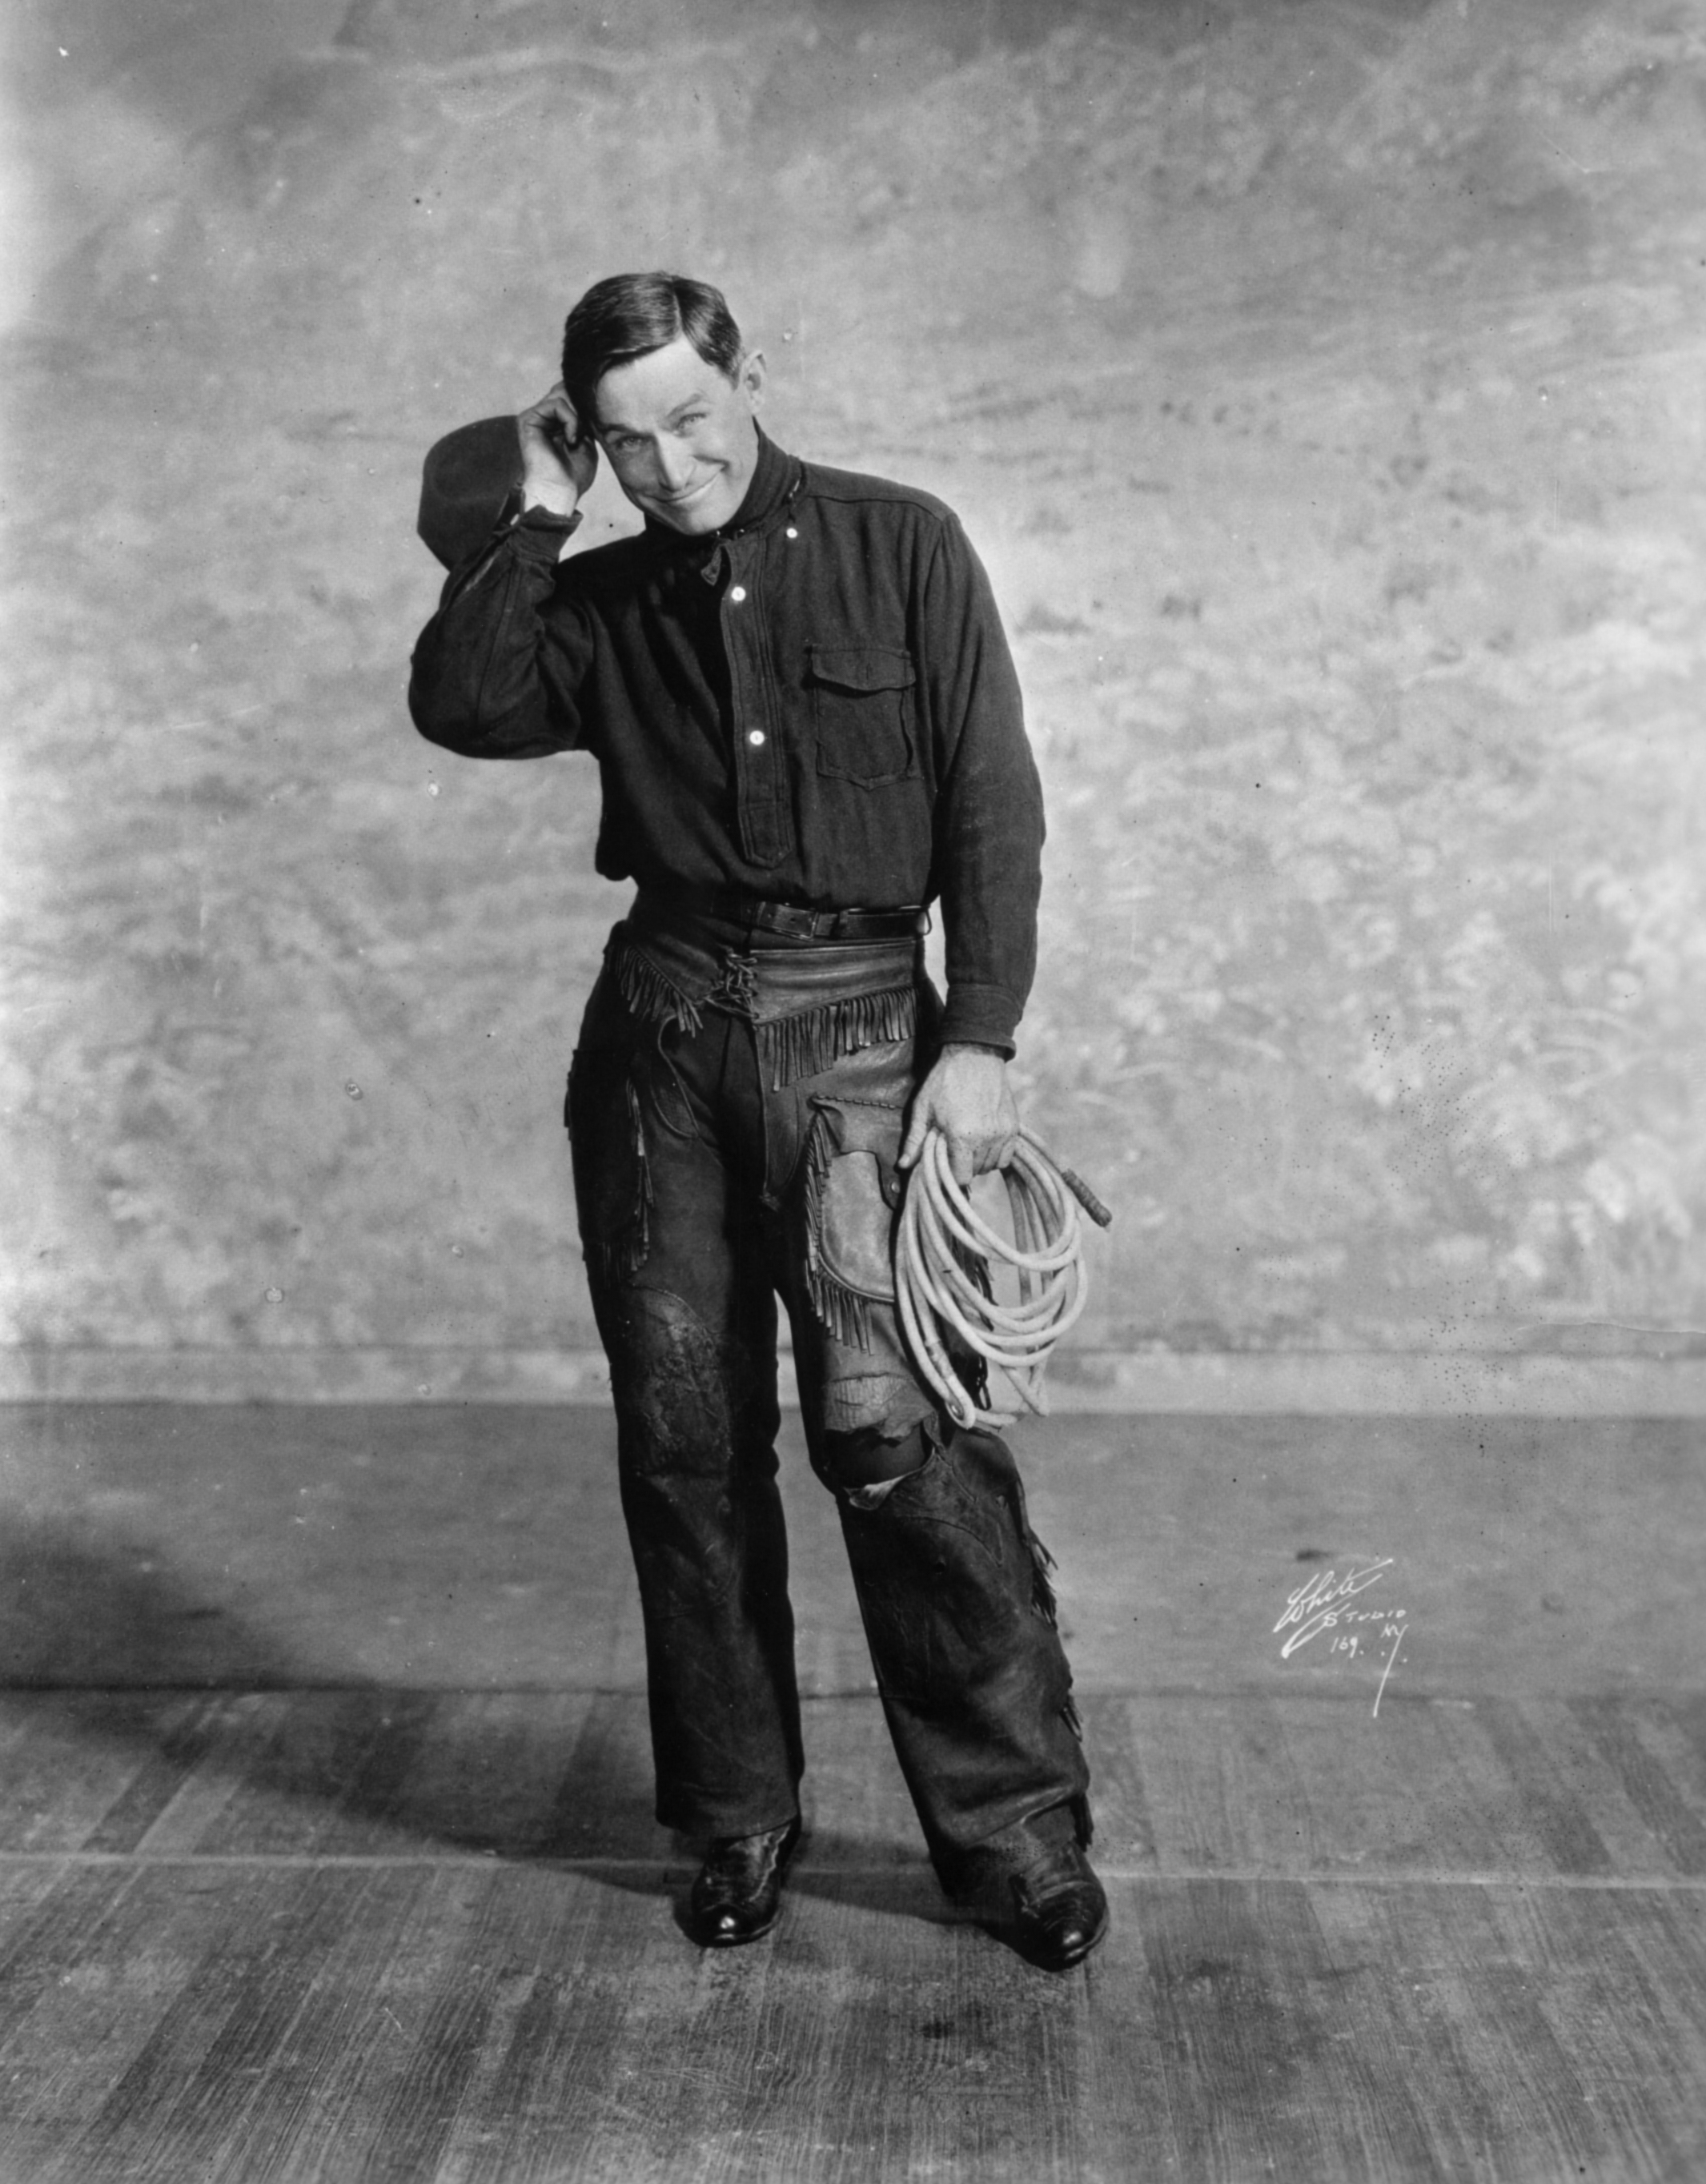 Will Rogers in famous vaudeville promotional photo.